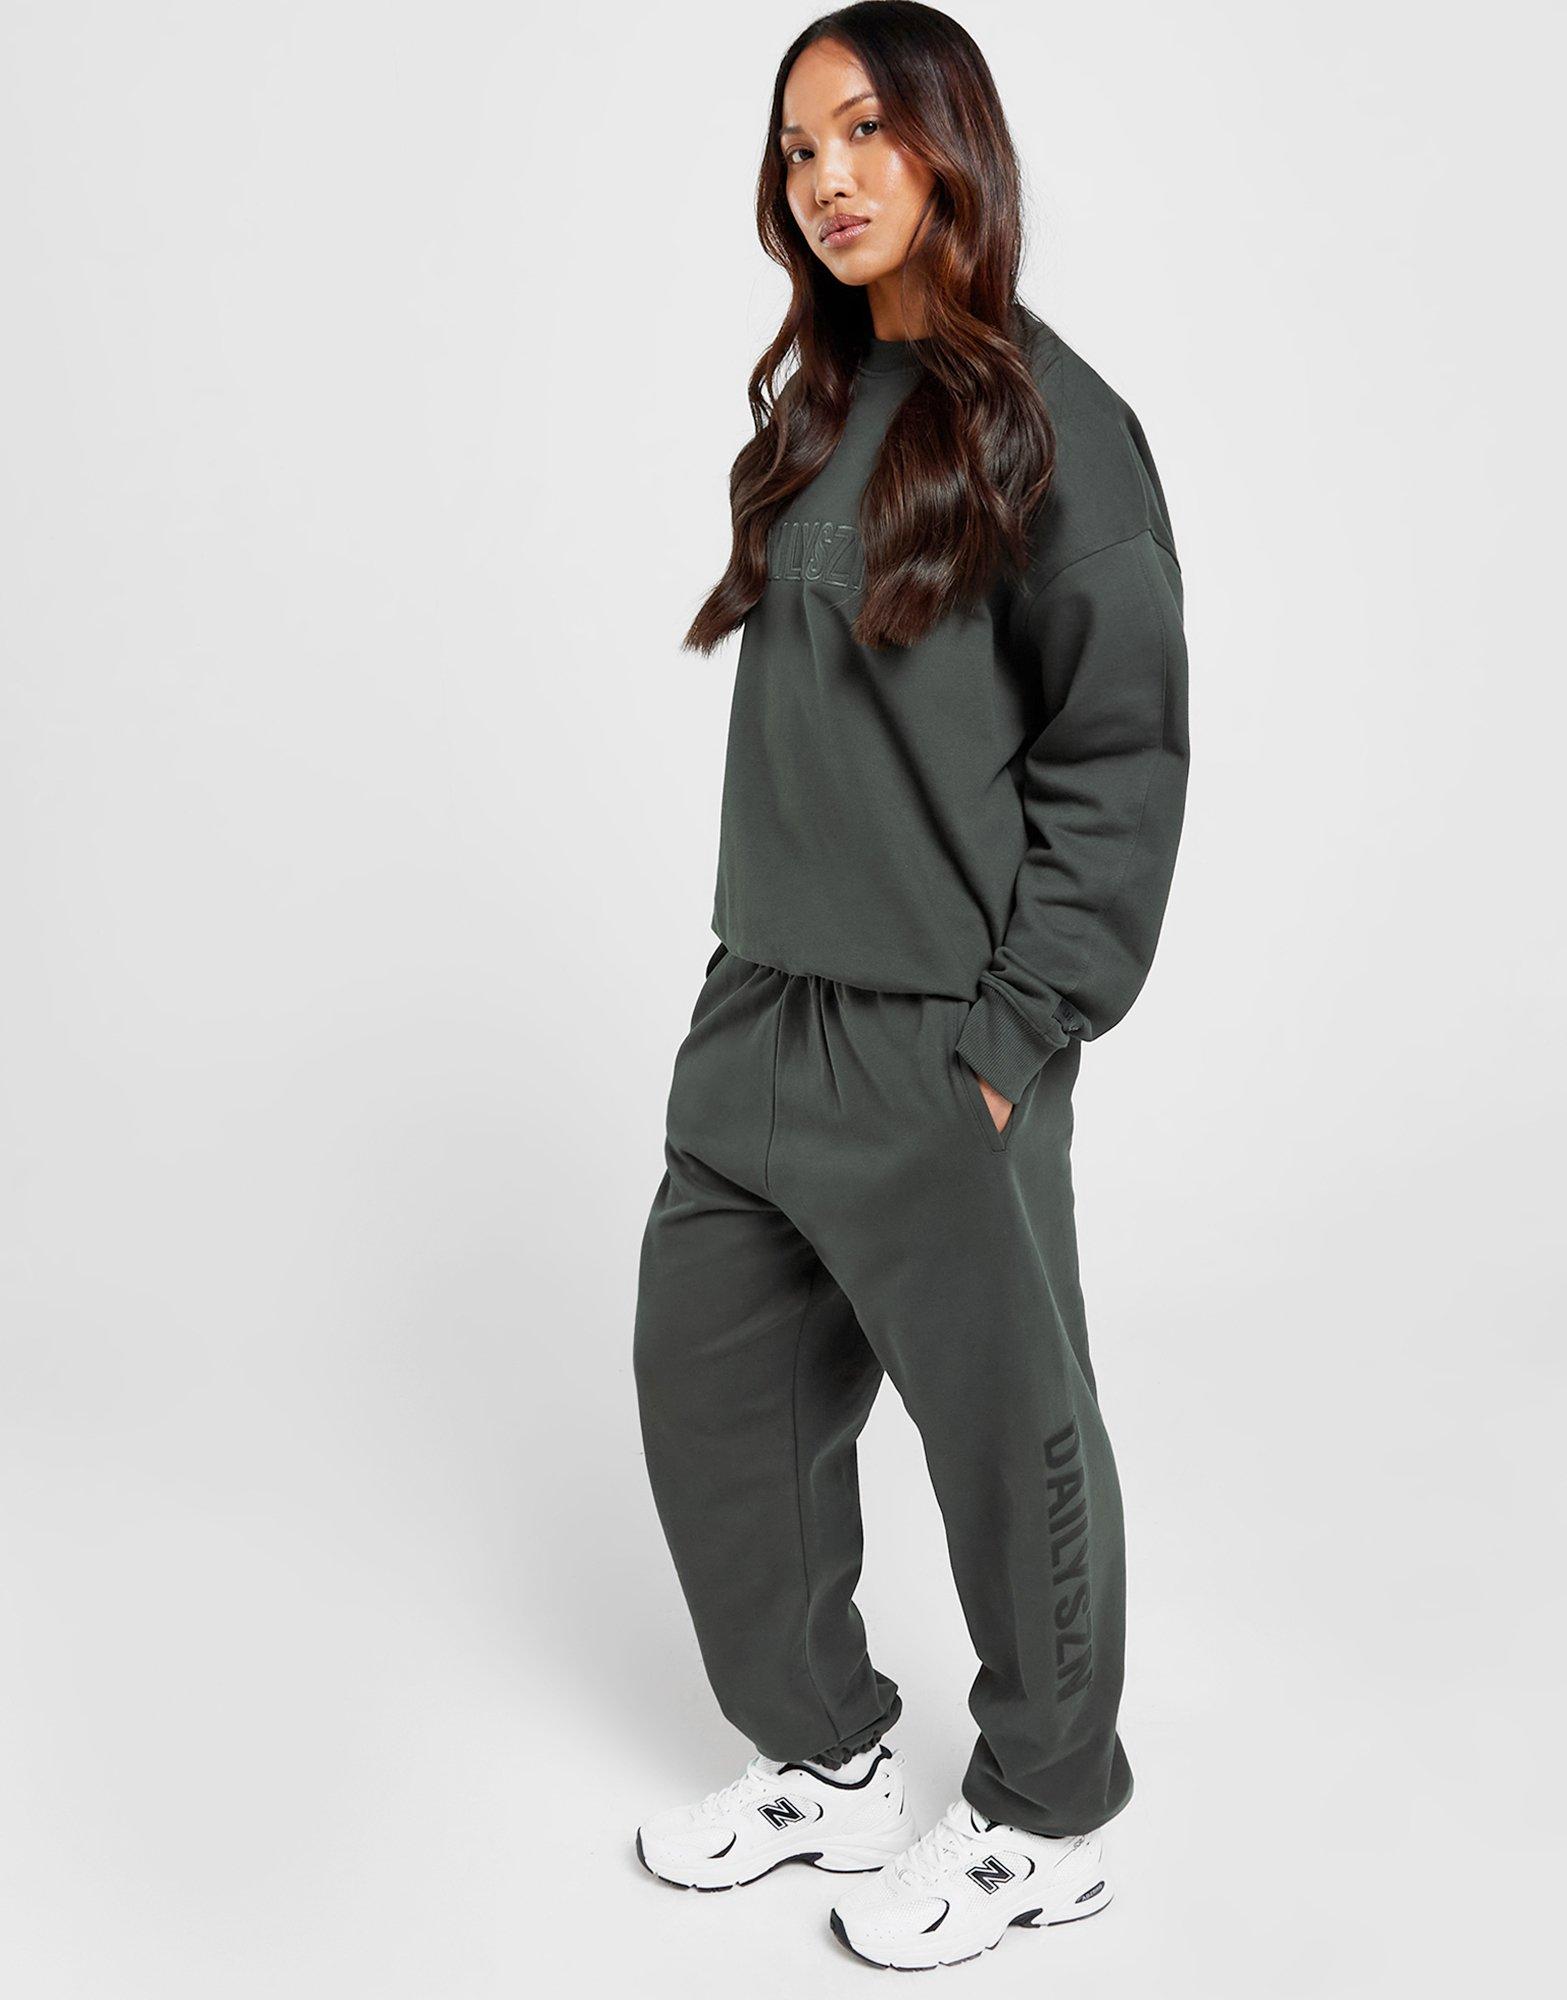 Buy Easy 2 Wear Womens Cotton Knitted Track Pant (Sizes S to 4XL) Full  Length and Plus Sizes (Zip Pocket) at